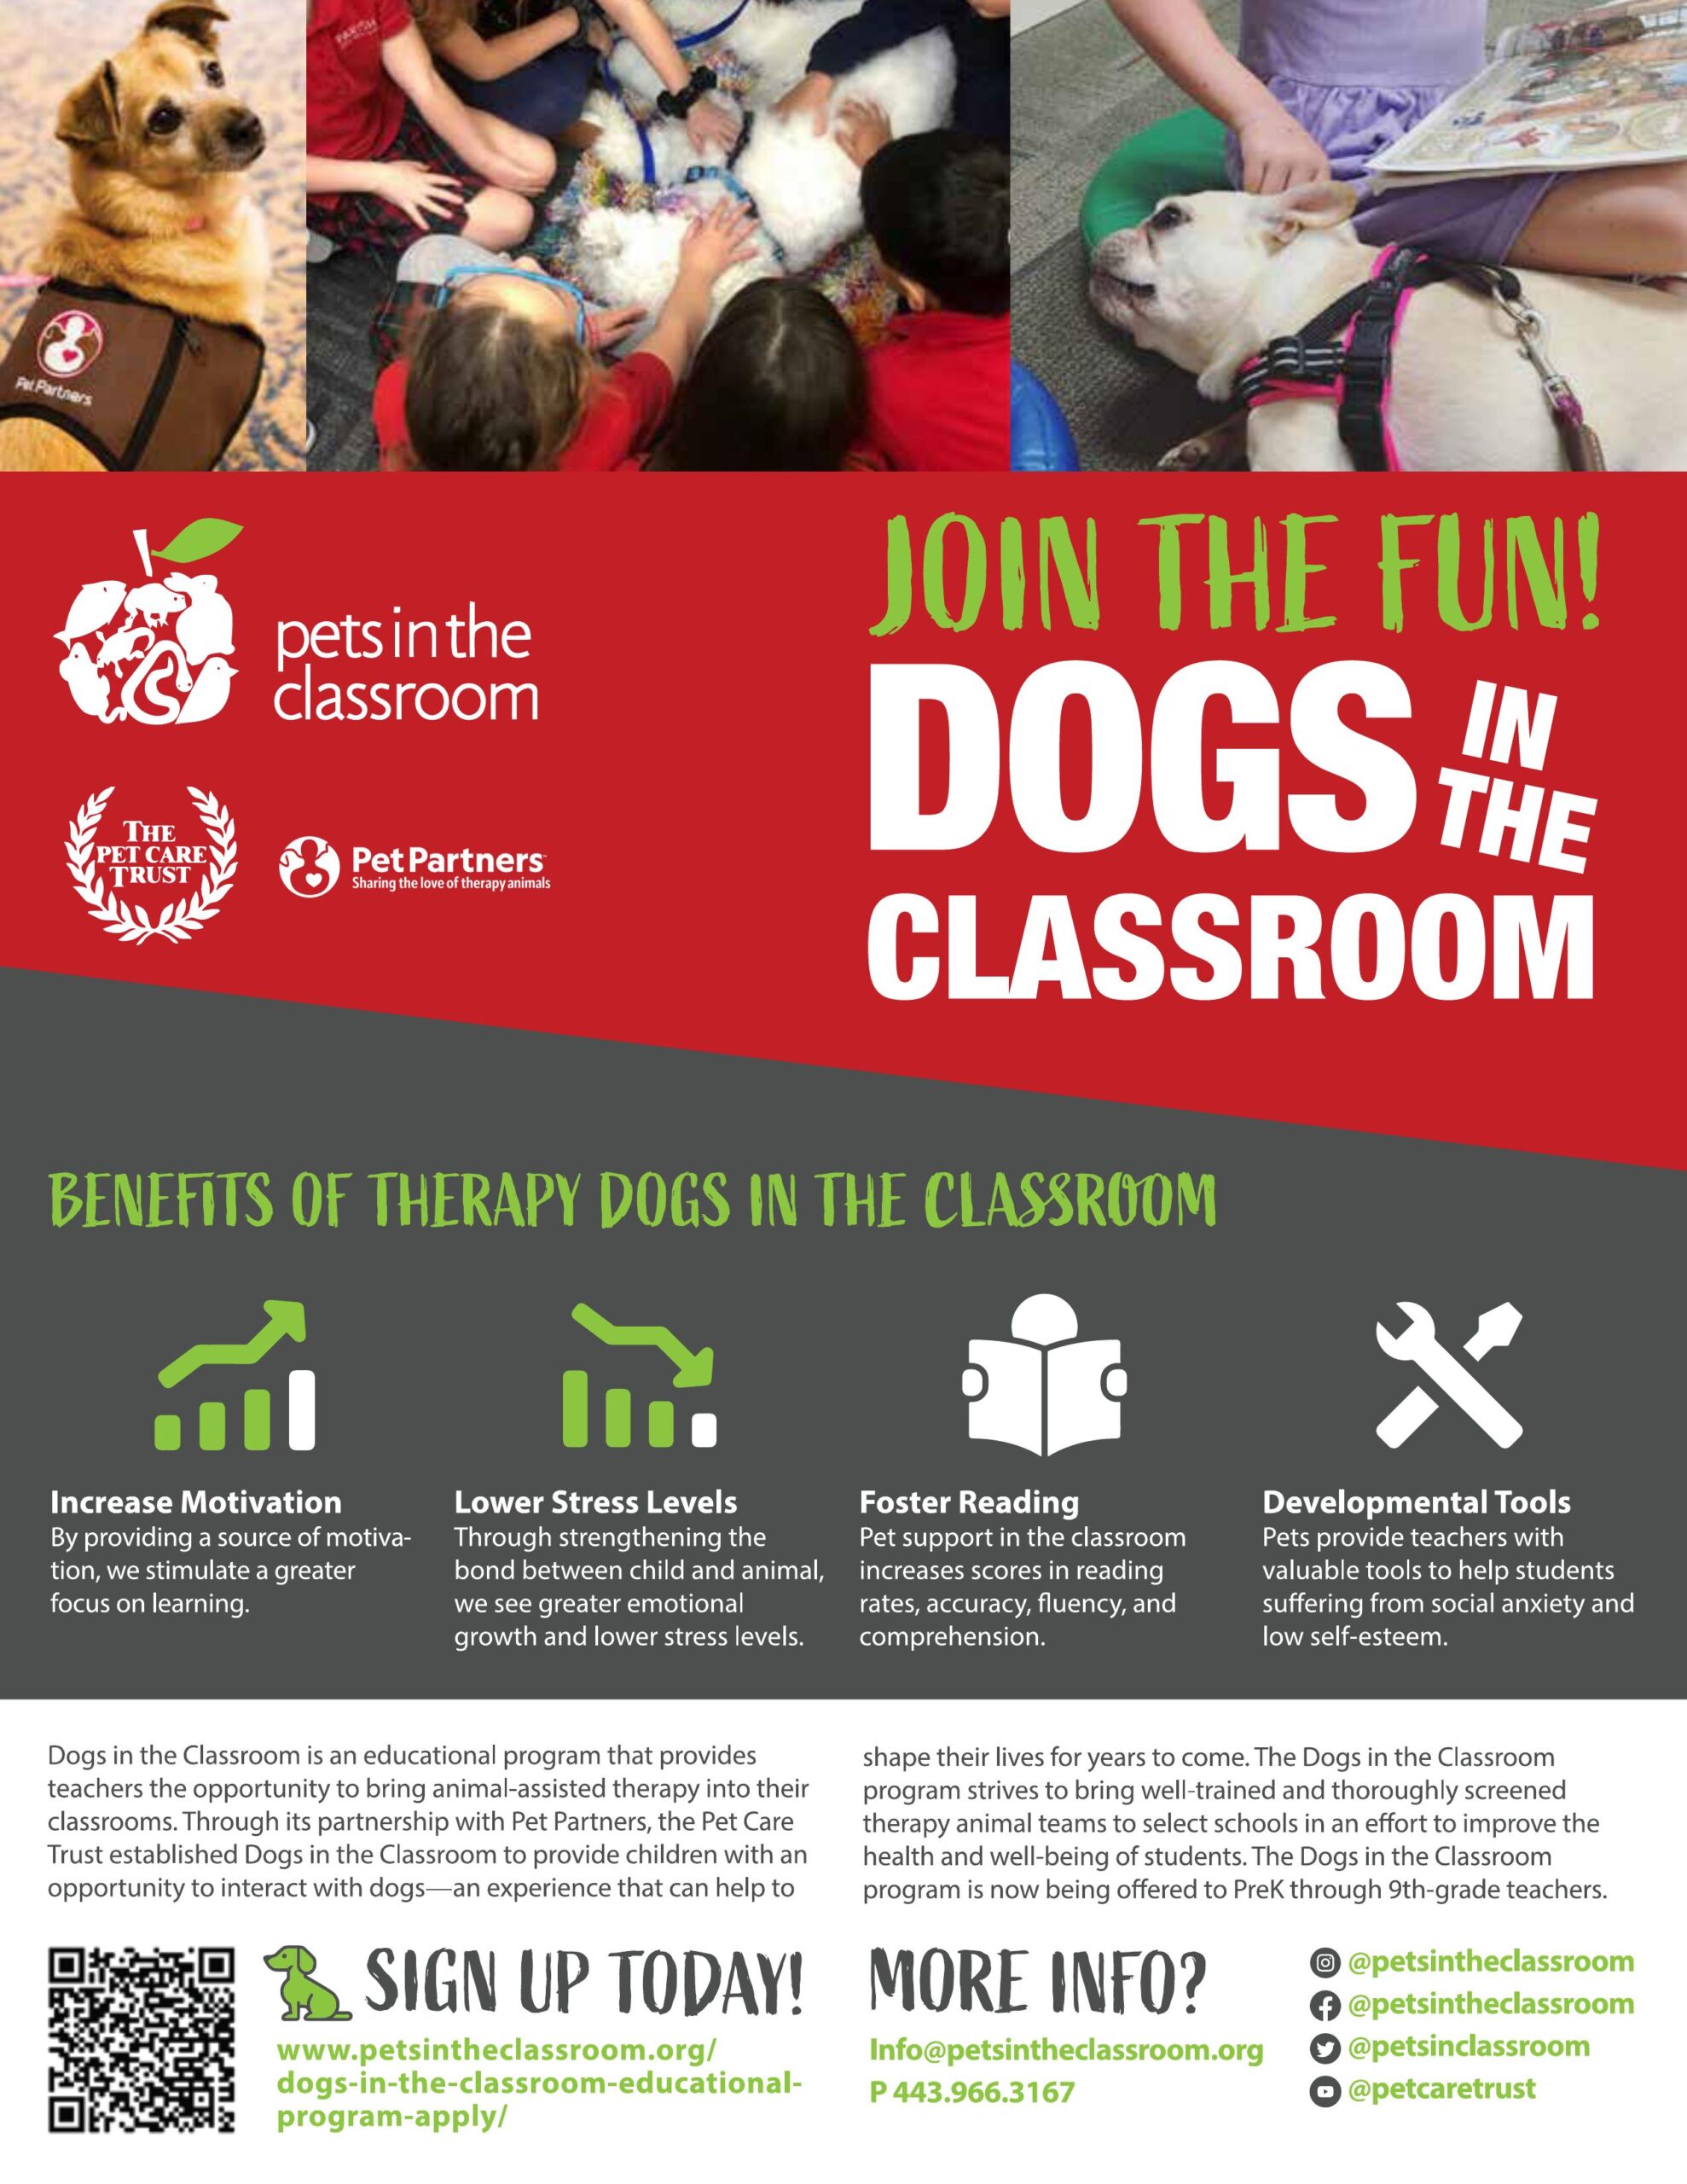 Dogs in the Classroom